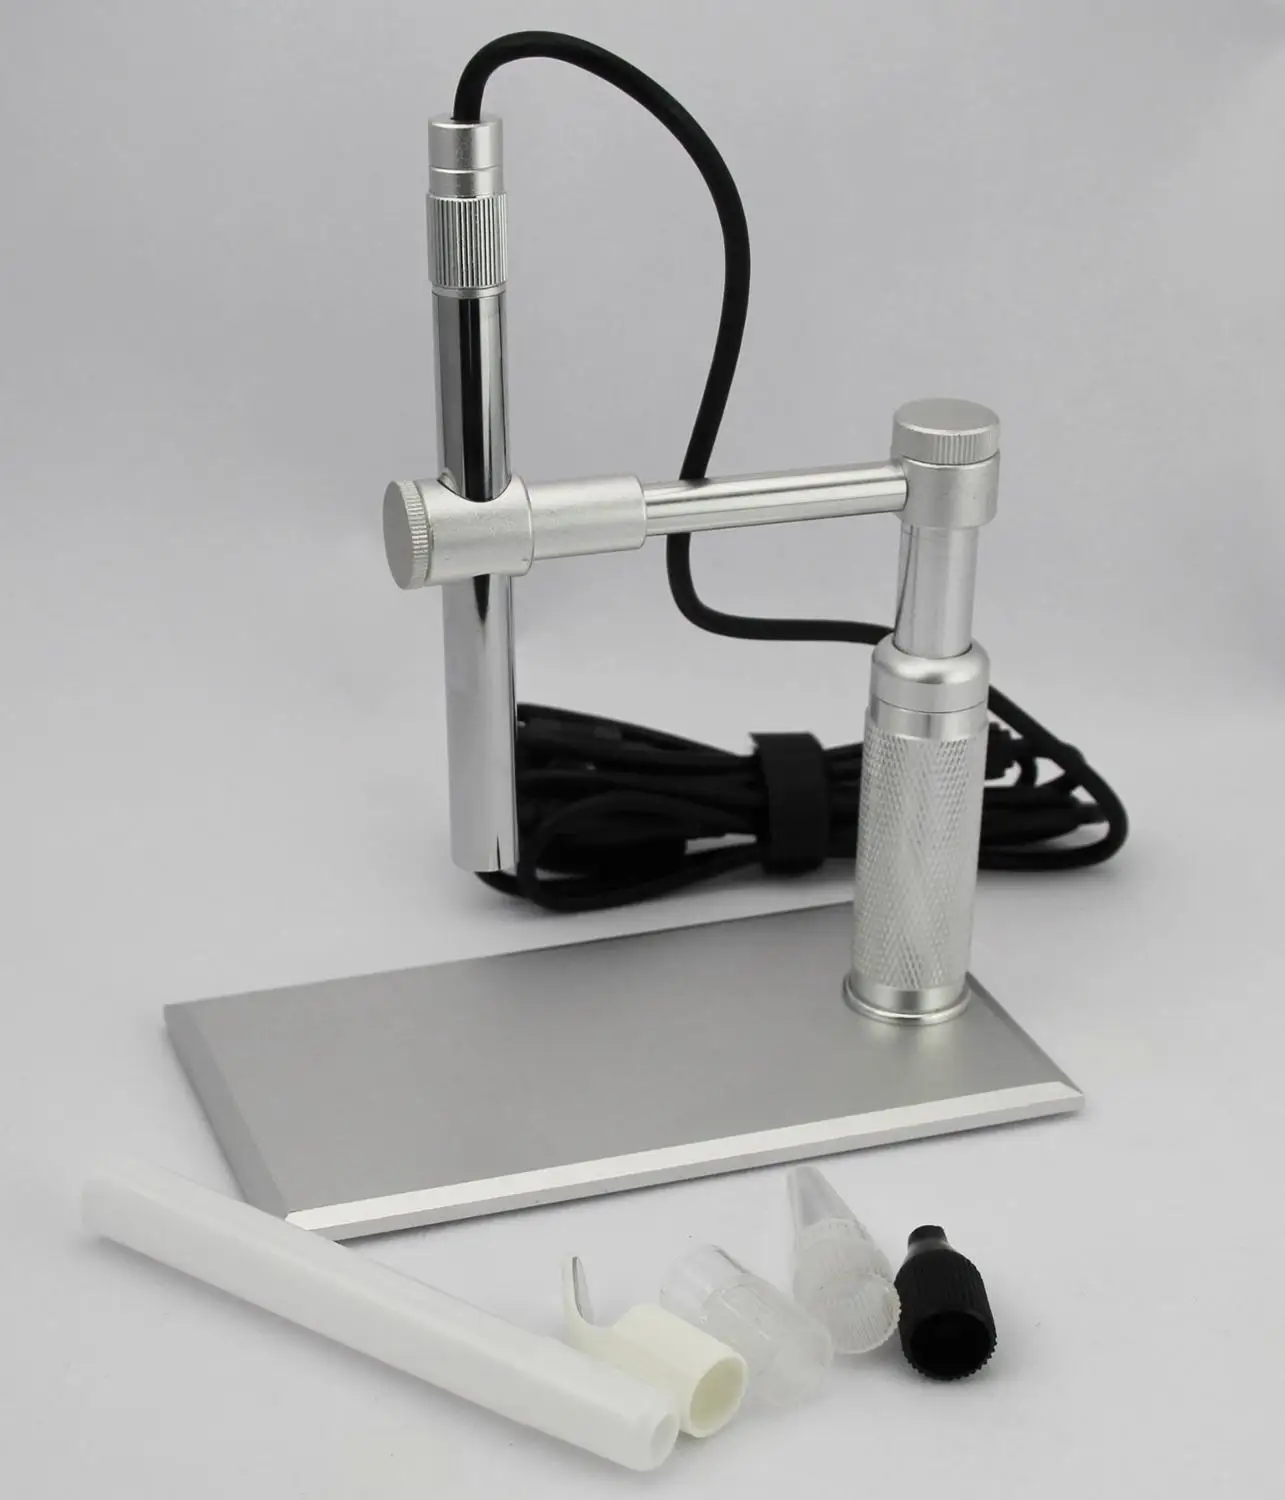 

Digital USB Microscope with stand and integrated LED light for hardware engineers